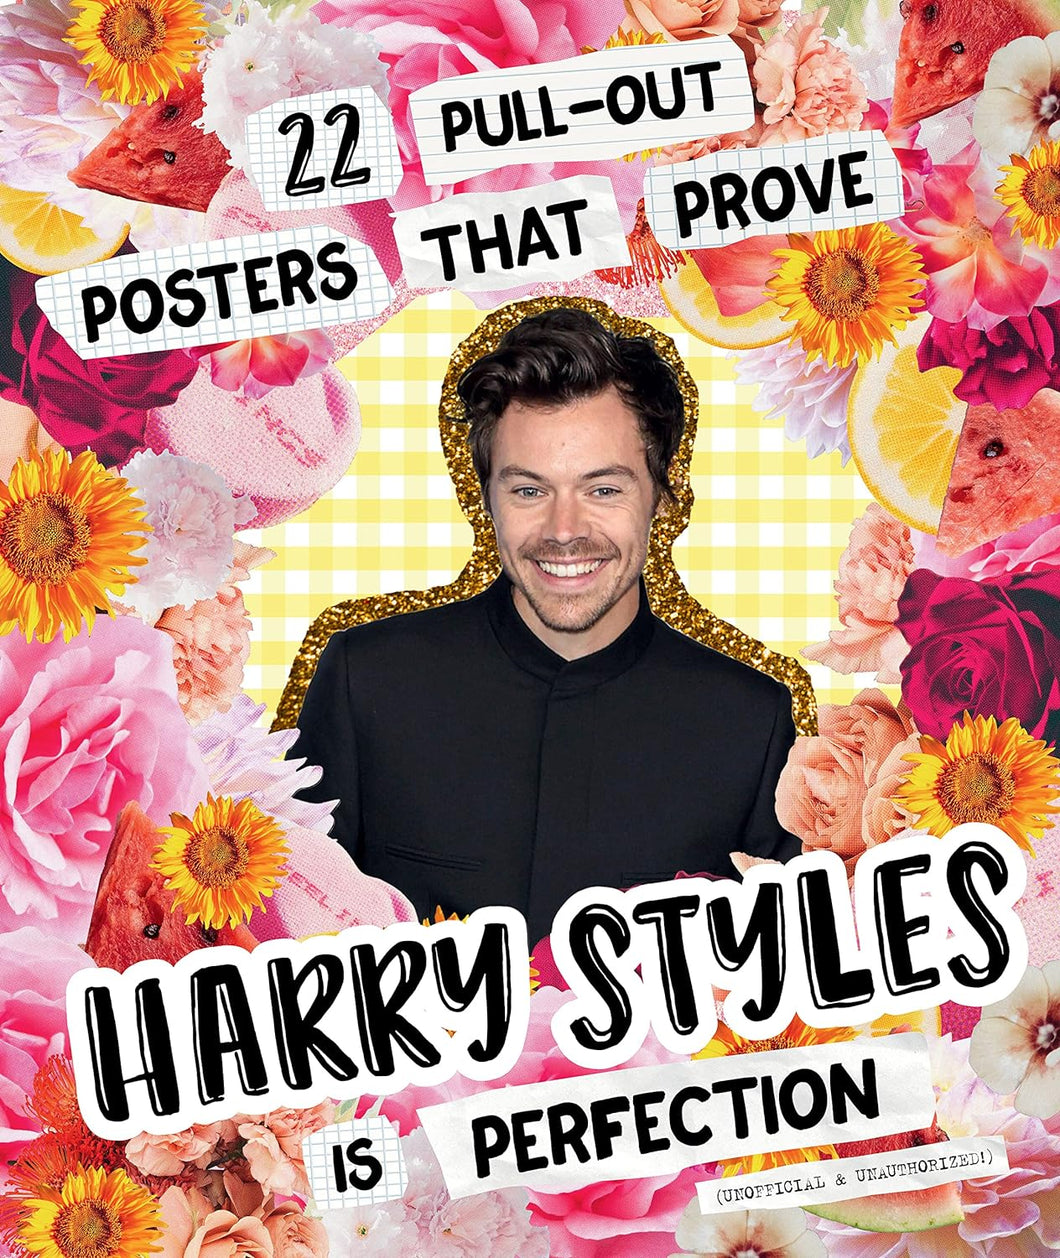 22 Pull-Out Posters That Prove Harry Styles is Perfection -- FINAL SALE